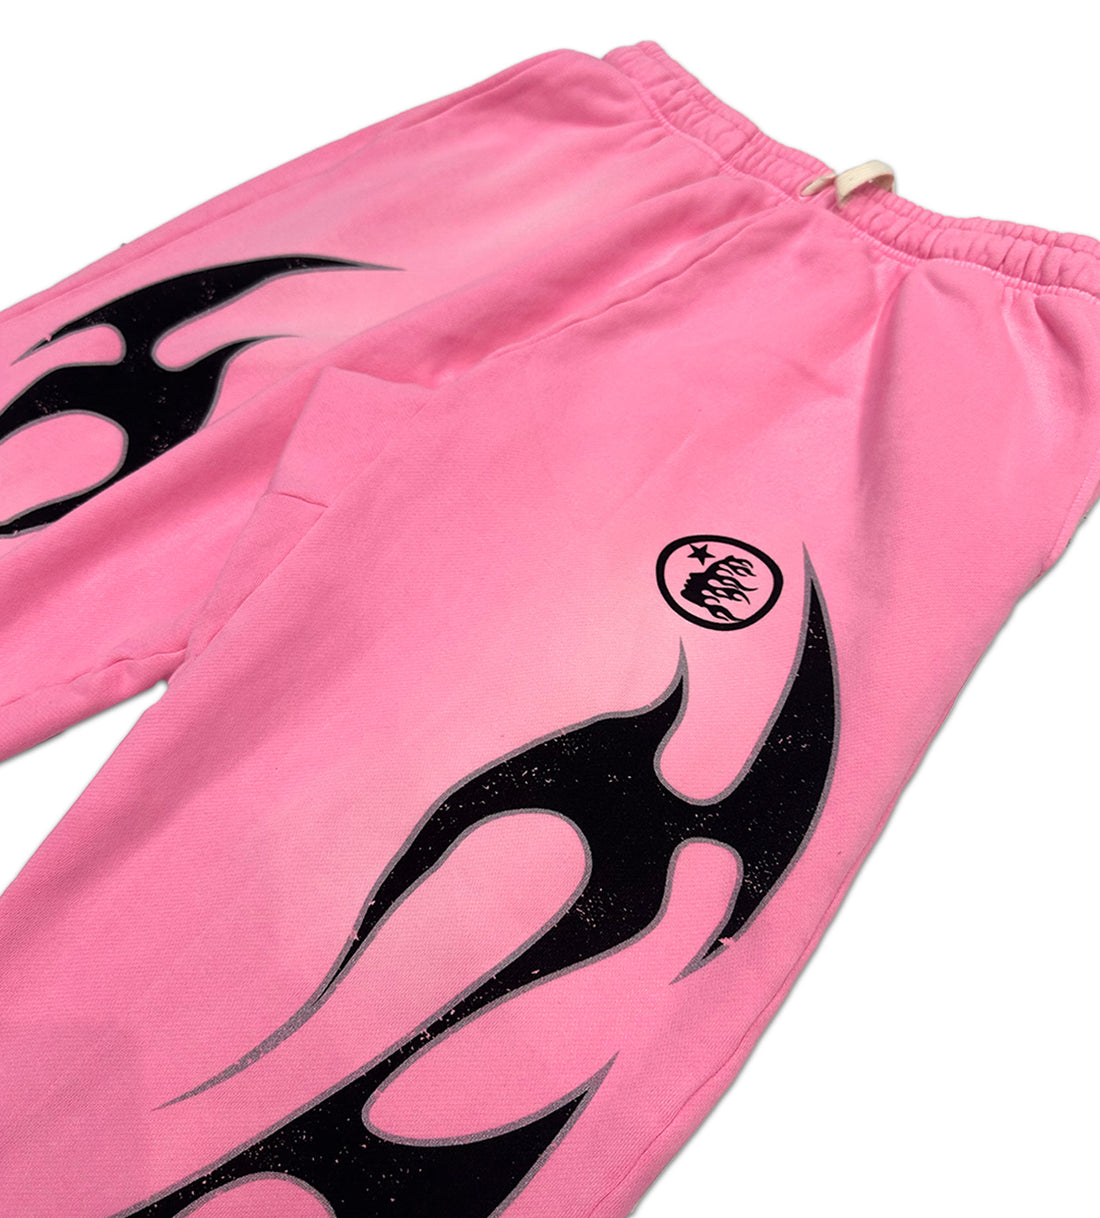 Product Image Of Hellstar Pink Flame Sweatpants Side View